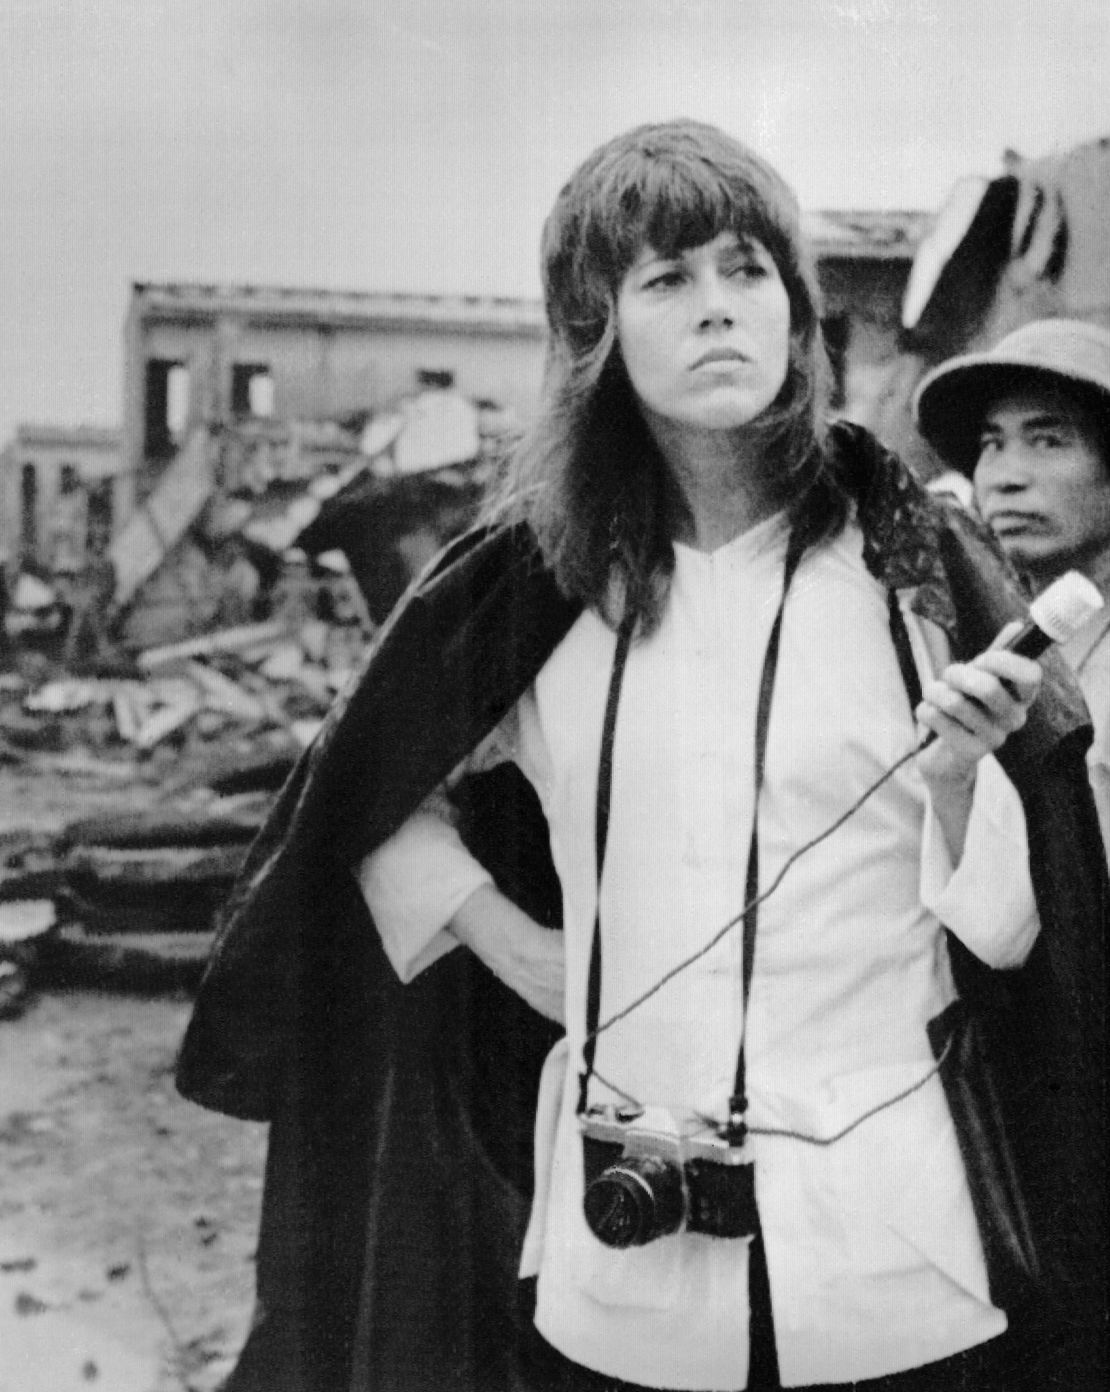 Fonda was lambasted for her trip to North Vietnam in 1972 during the Vietnam War.